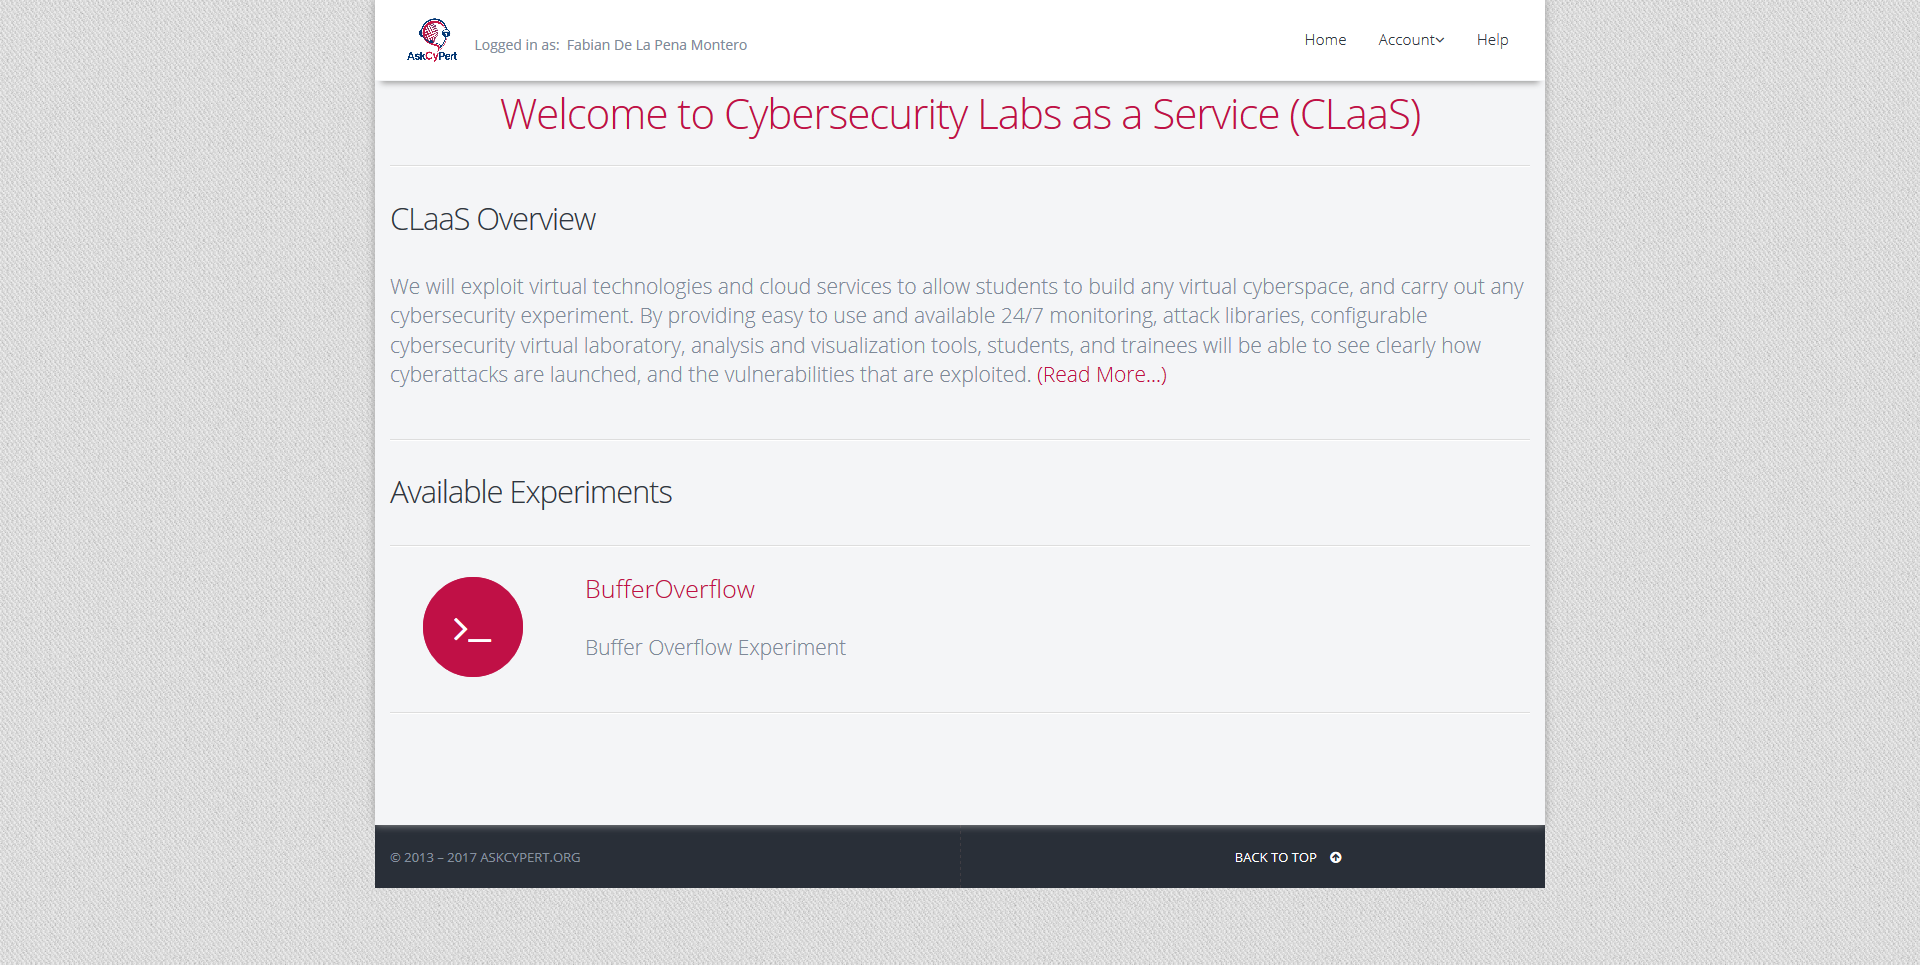 CyberSecurity Labs as a Service